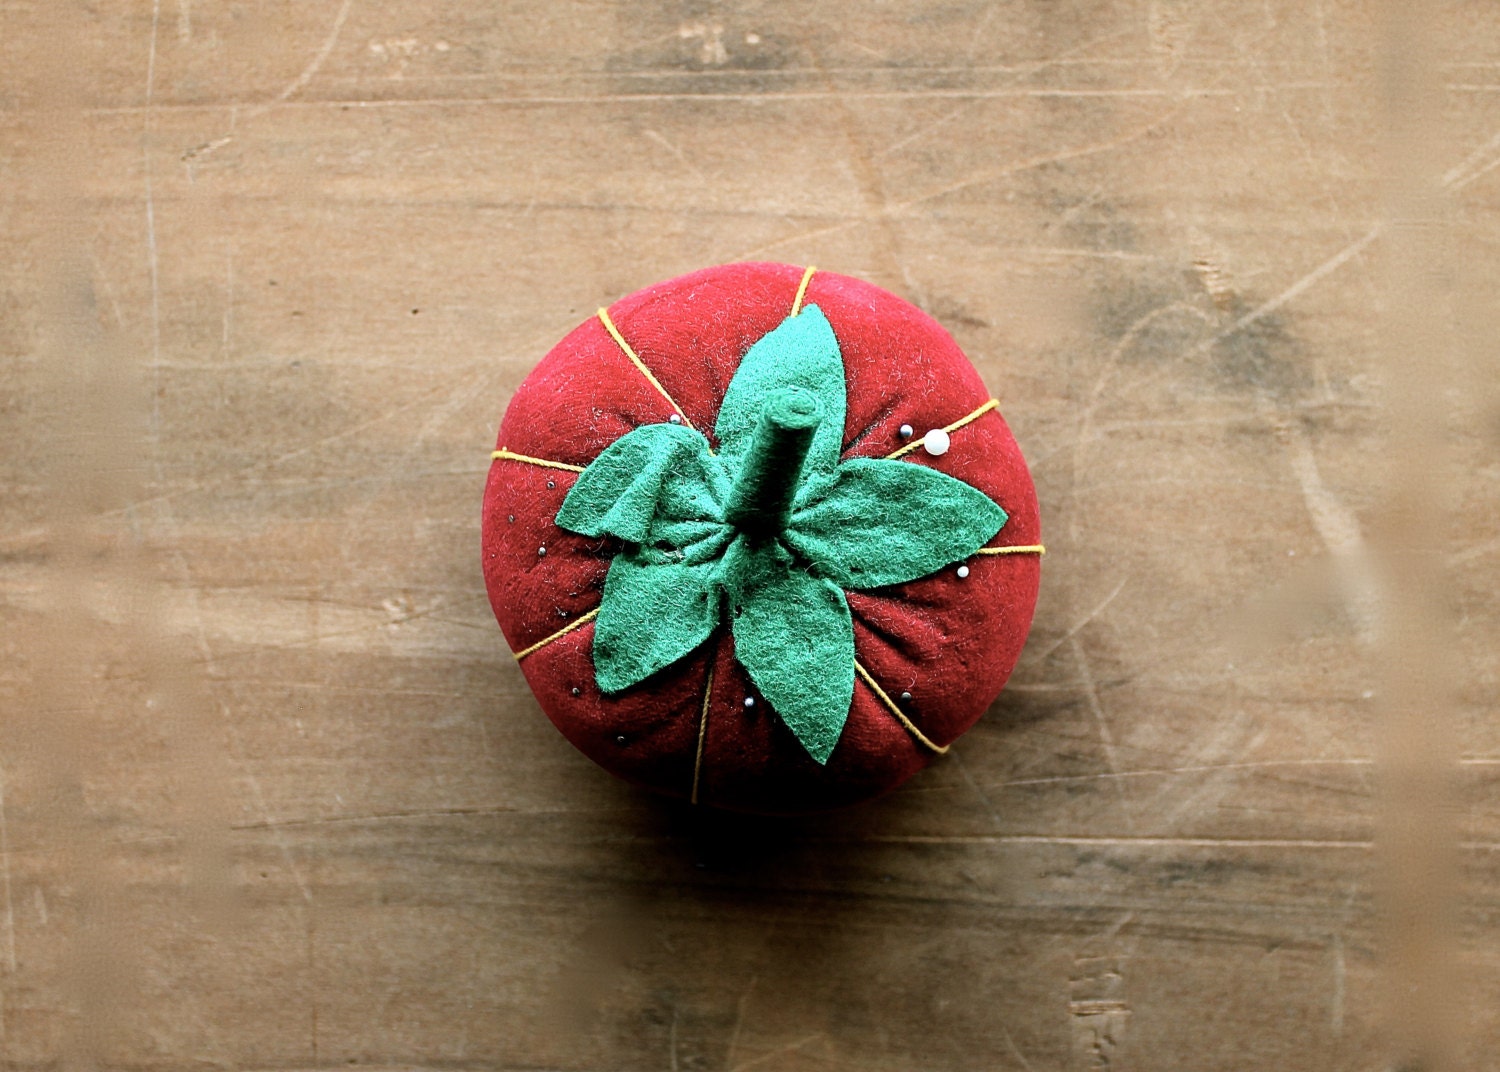 Perfectly Ripe - Vintage Velvet Red Tomato Pin Cushion - Made in Japan - Sewing - Spring - Garden - Studio - Seamstress - becaruns